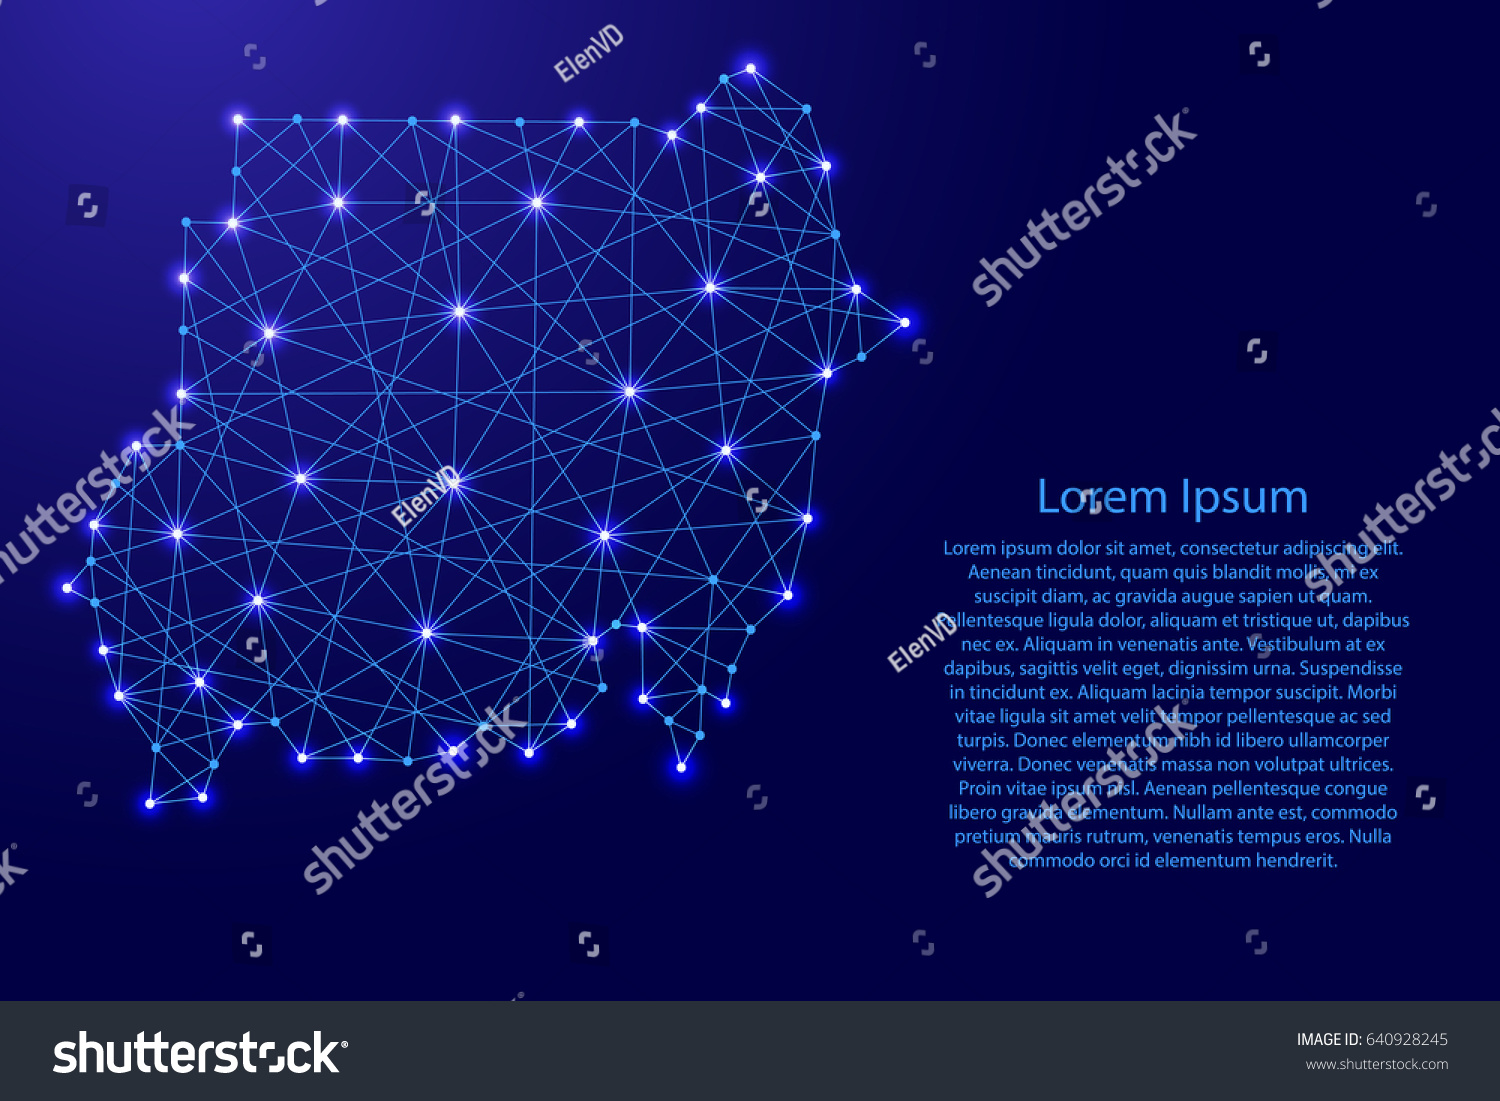 Map of Sudan from polygonal blue lines and glowing stars vector illustration #640928245